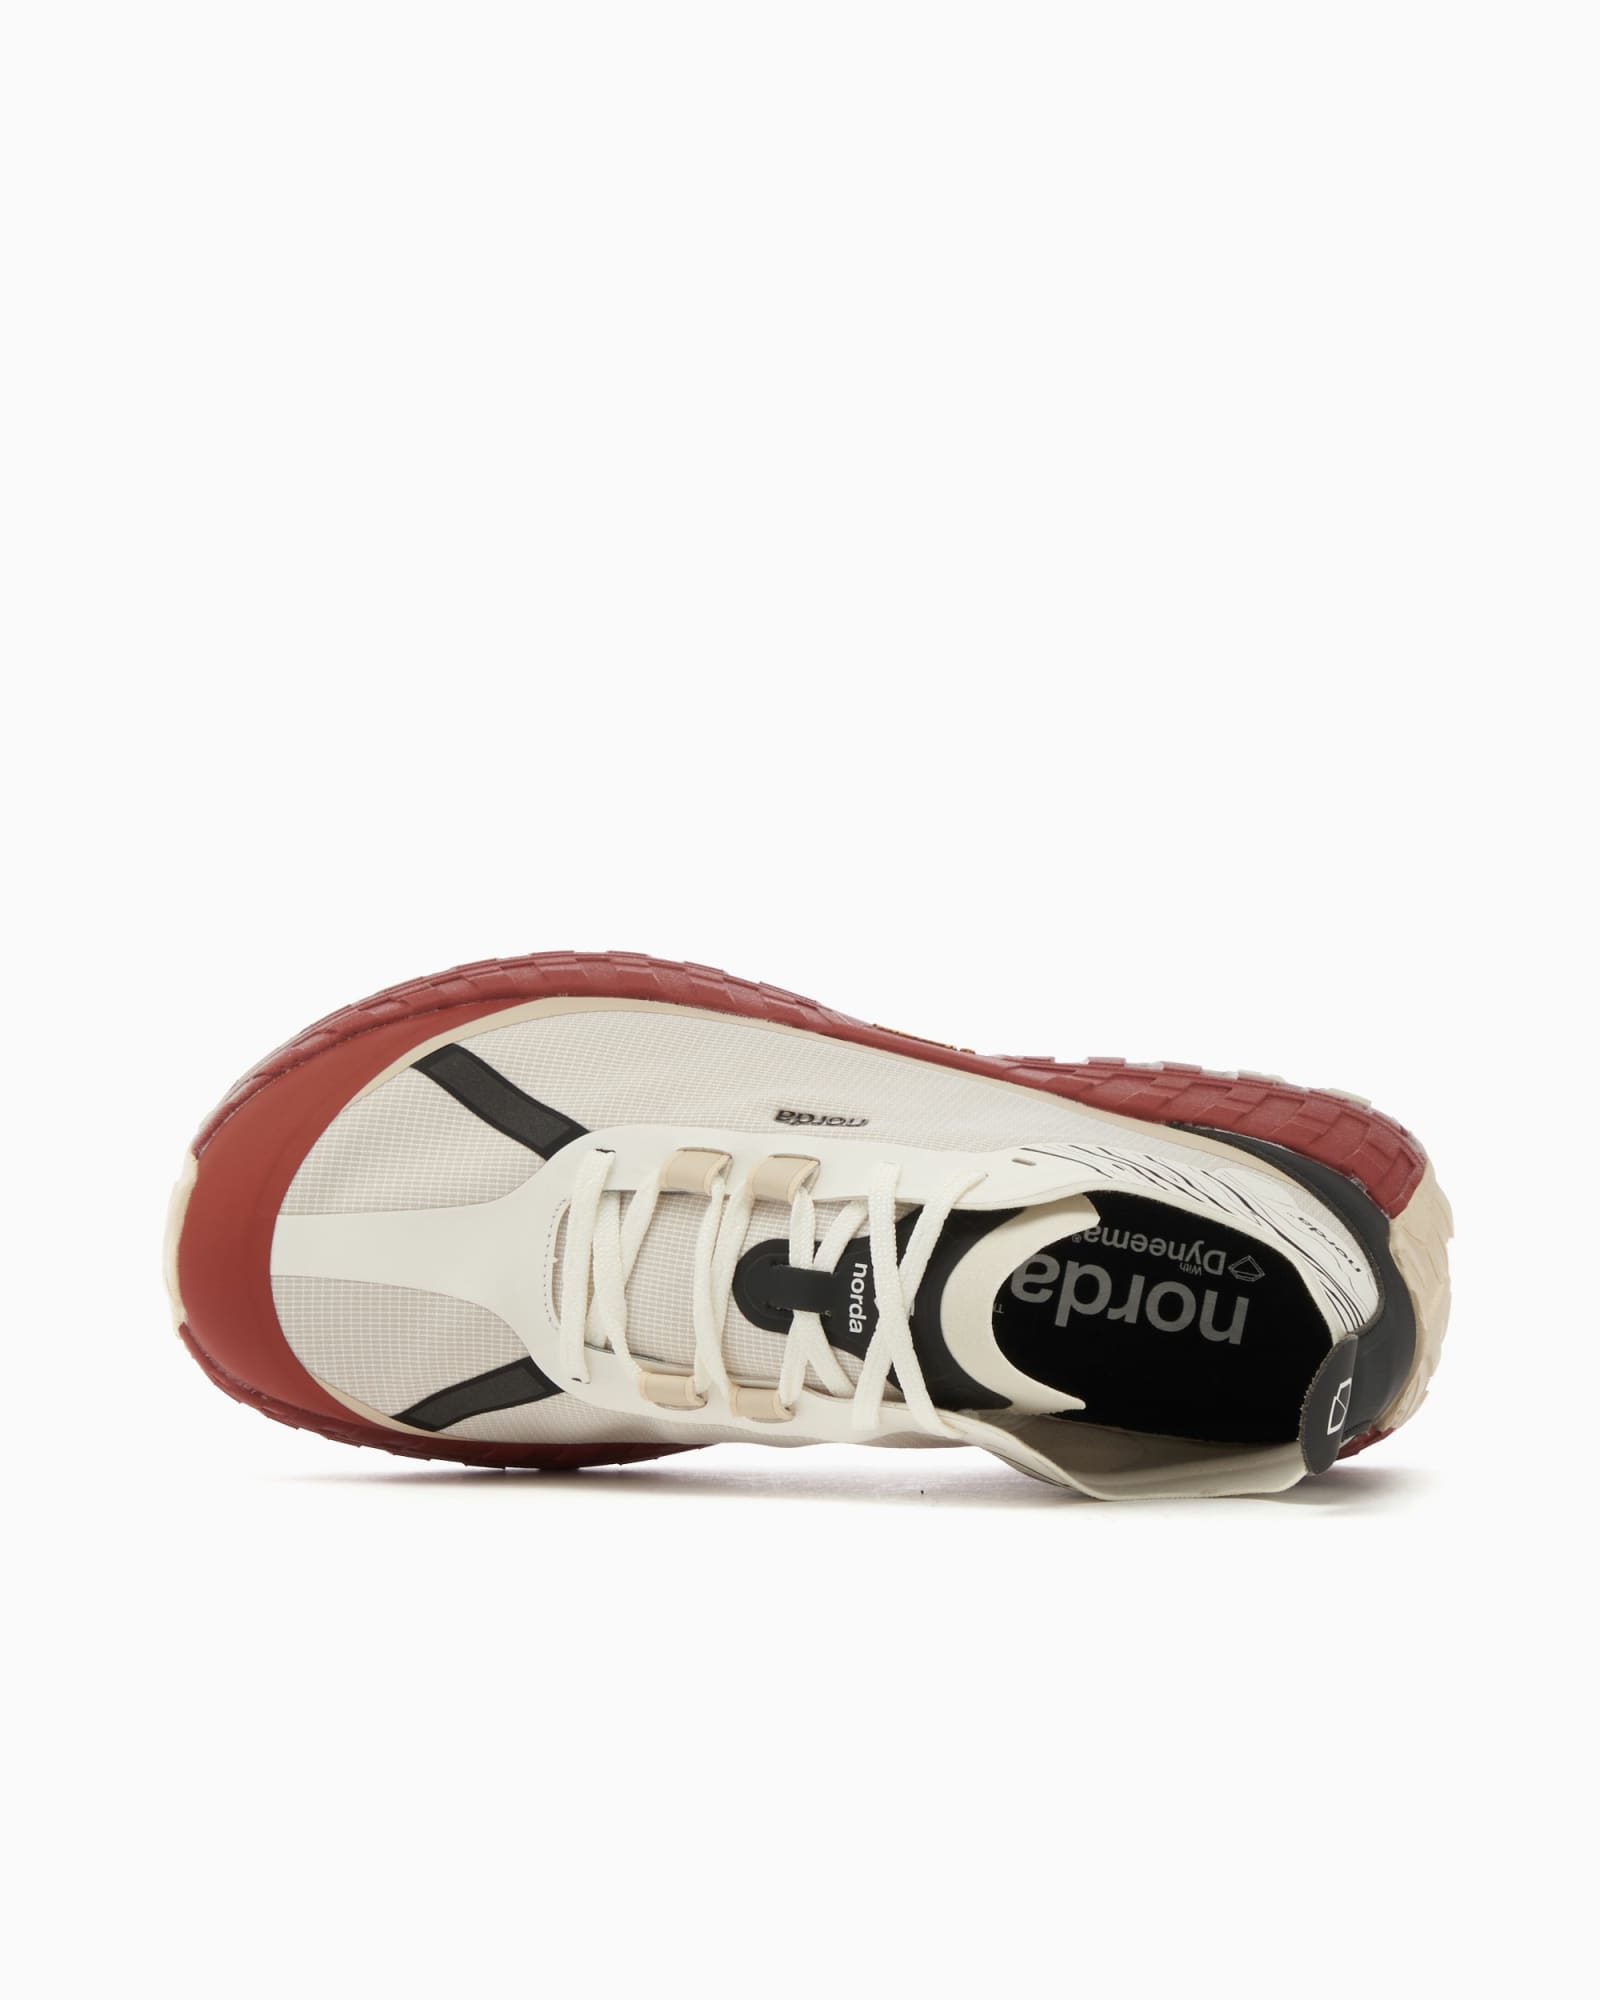 Shop Norda The 001 M Mars In Red